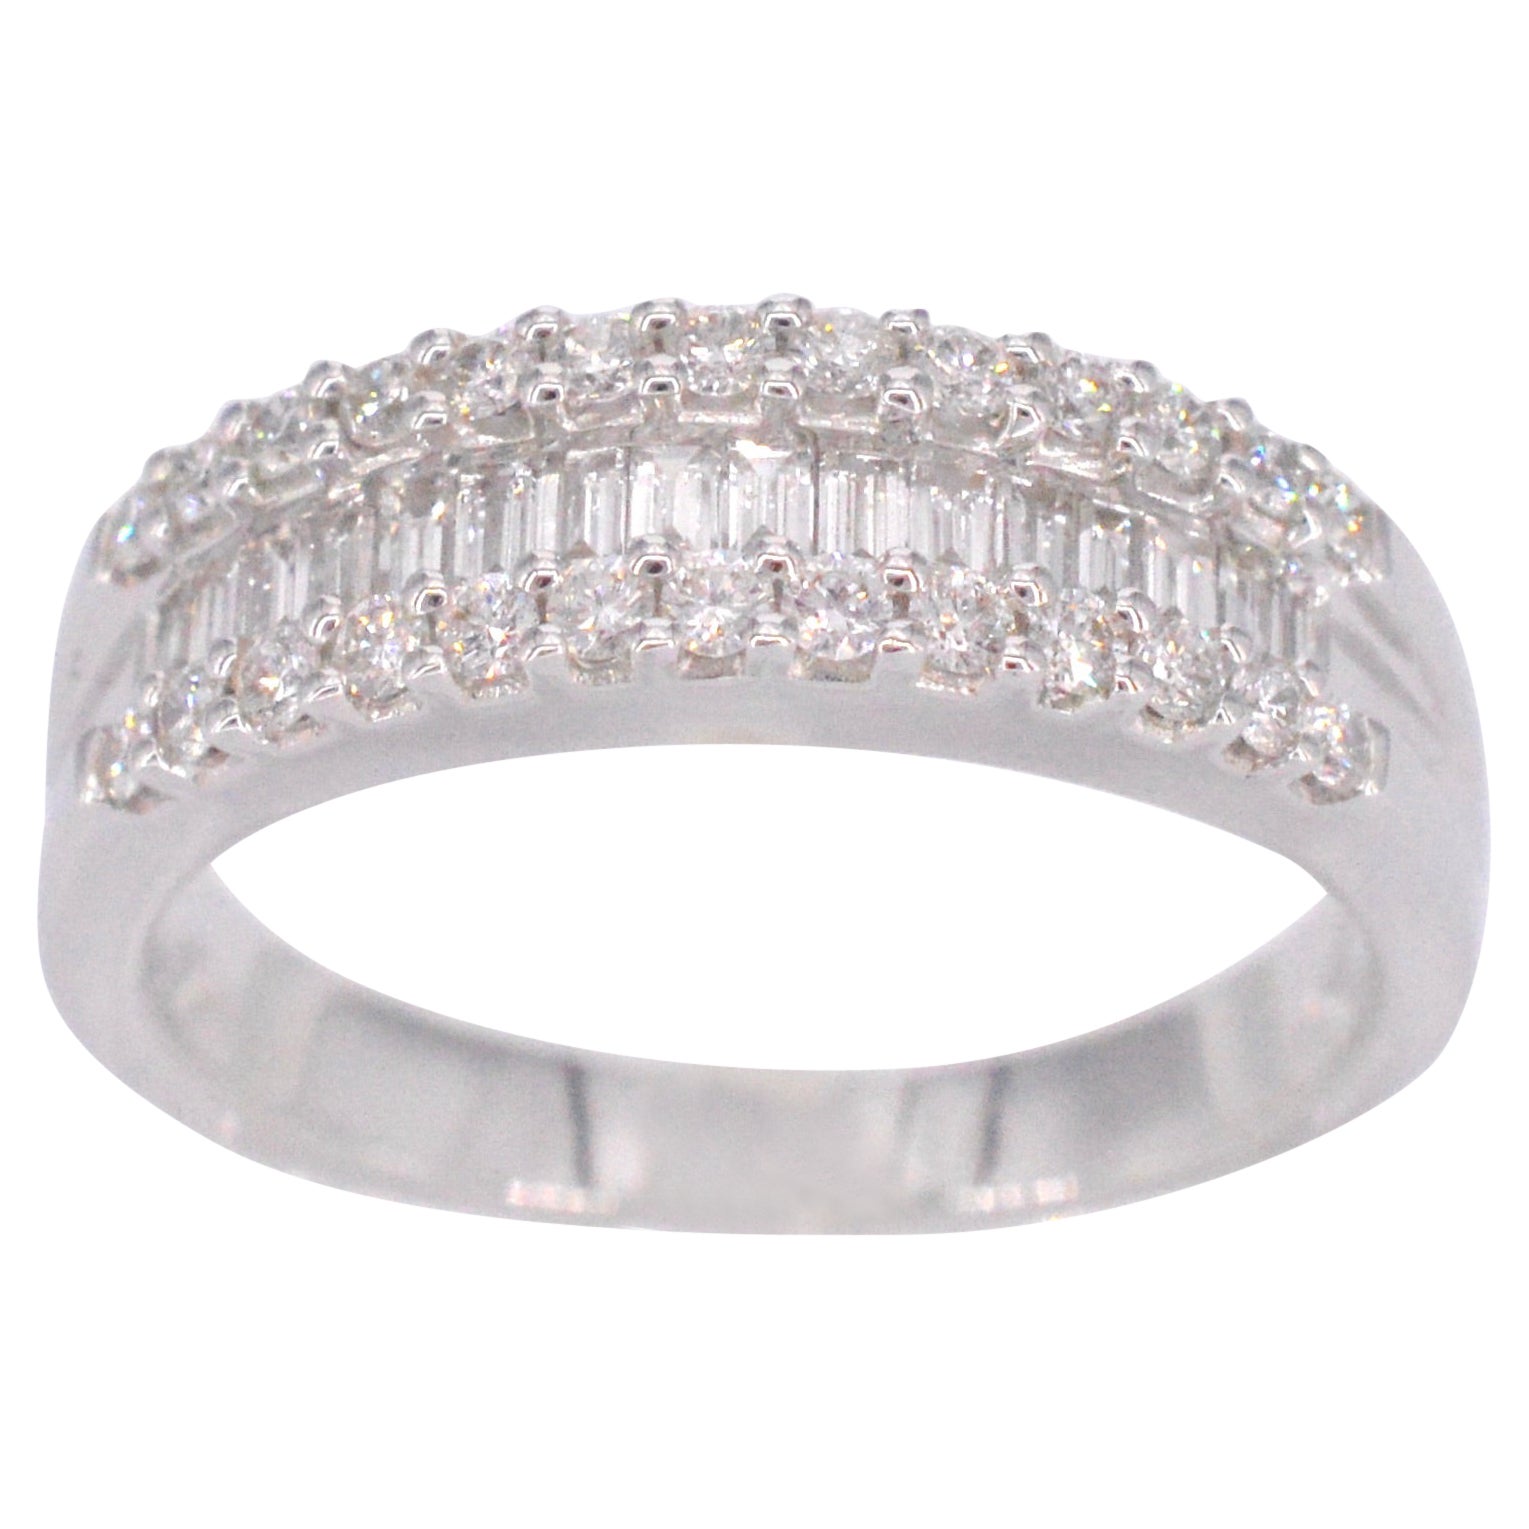 White Gold Ring with Diamonds and Baguettes